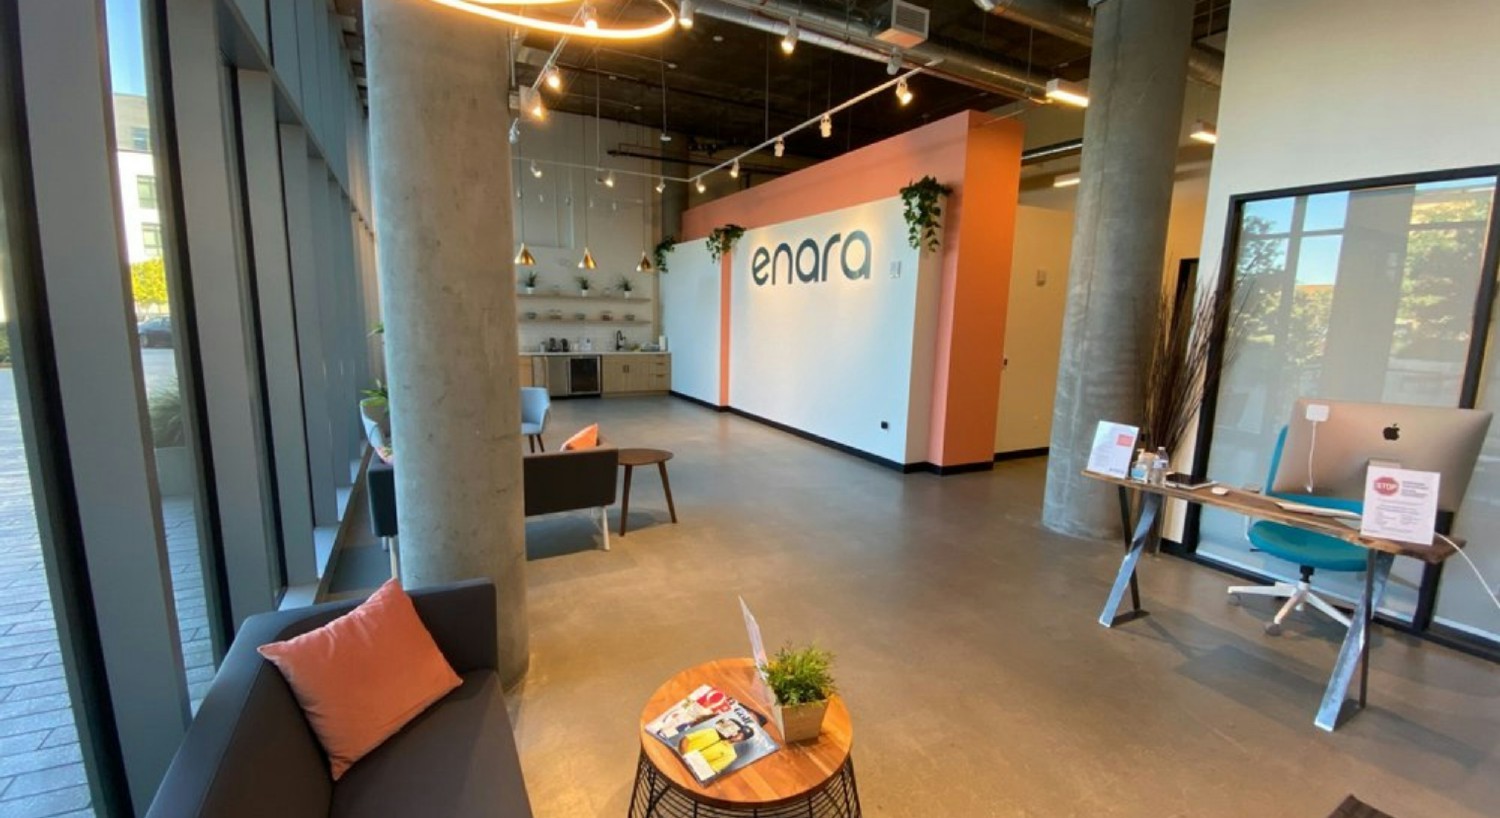 Enara offers visitors a spacious lobby with plenty of light and a kitchen.